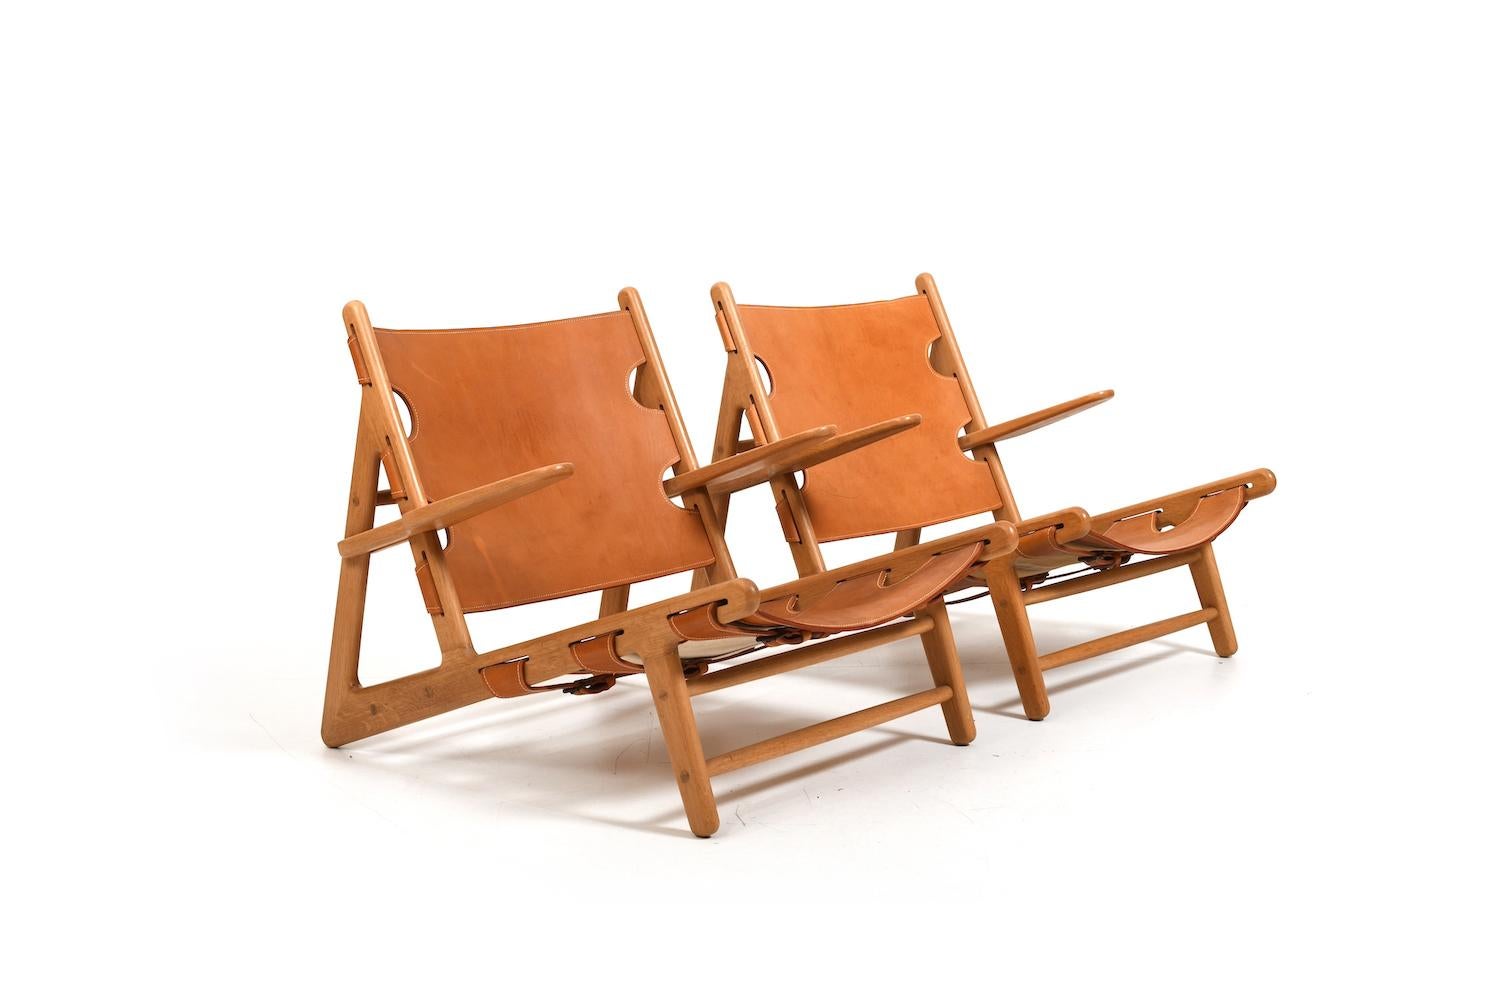 Pair of Børge Mogensen hunting chairs , model 2229 for Fredericia Stolefabrik. Made in oak and natural leather. Produced 1970s. With nice patina. The chairs were professionally stored for a long time because the previous owner was less able to use